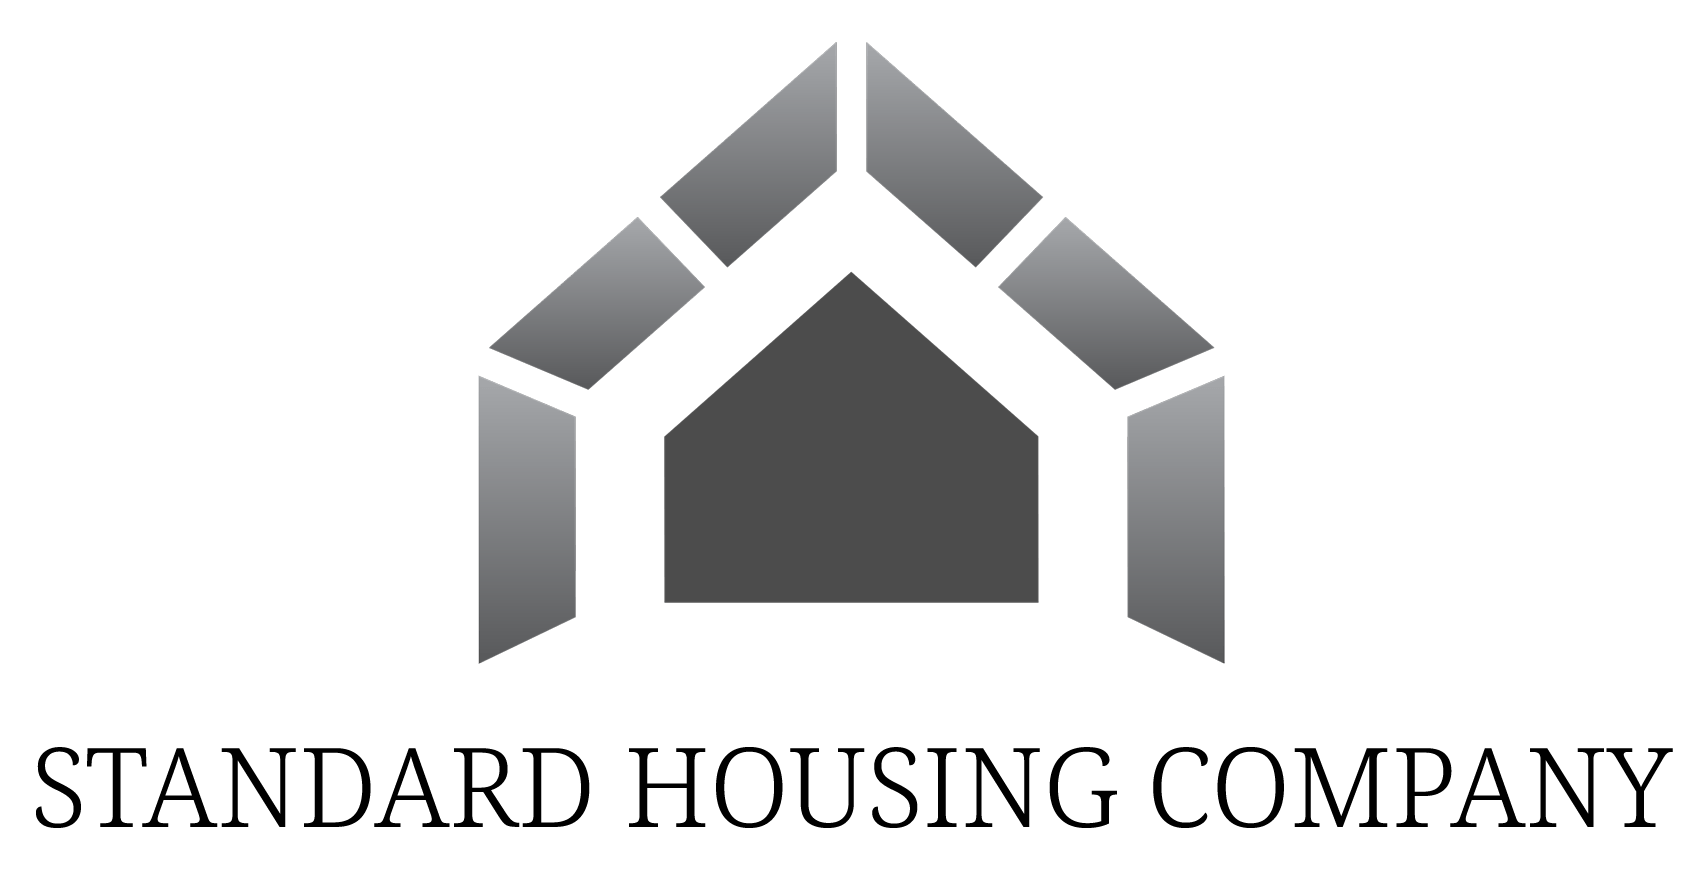 Standard Housing Company Logo - Select to go to Home Page